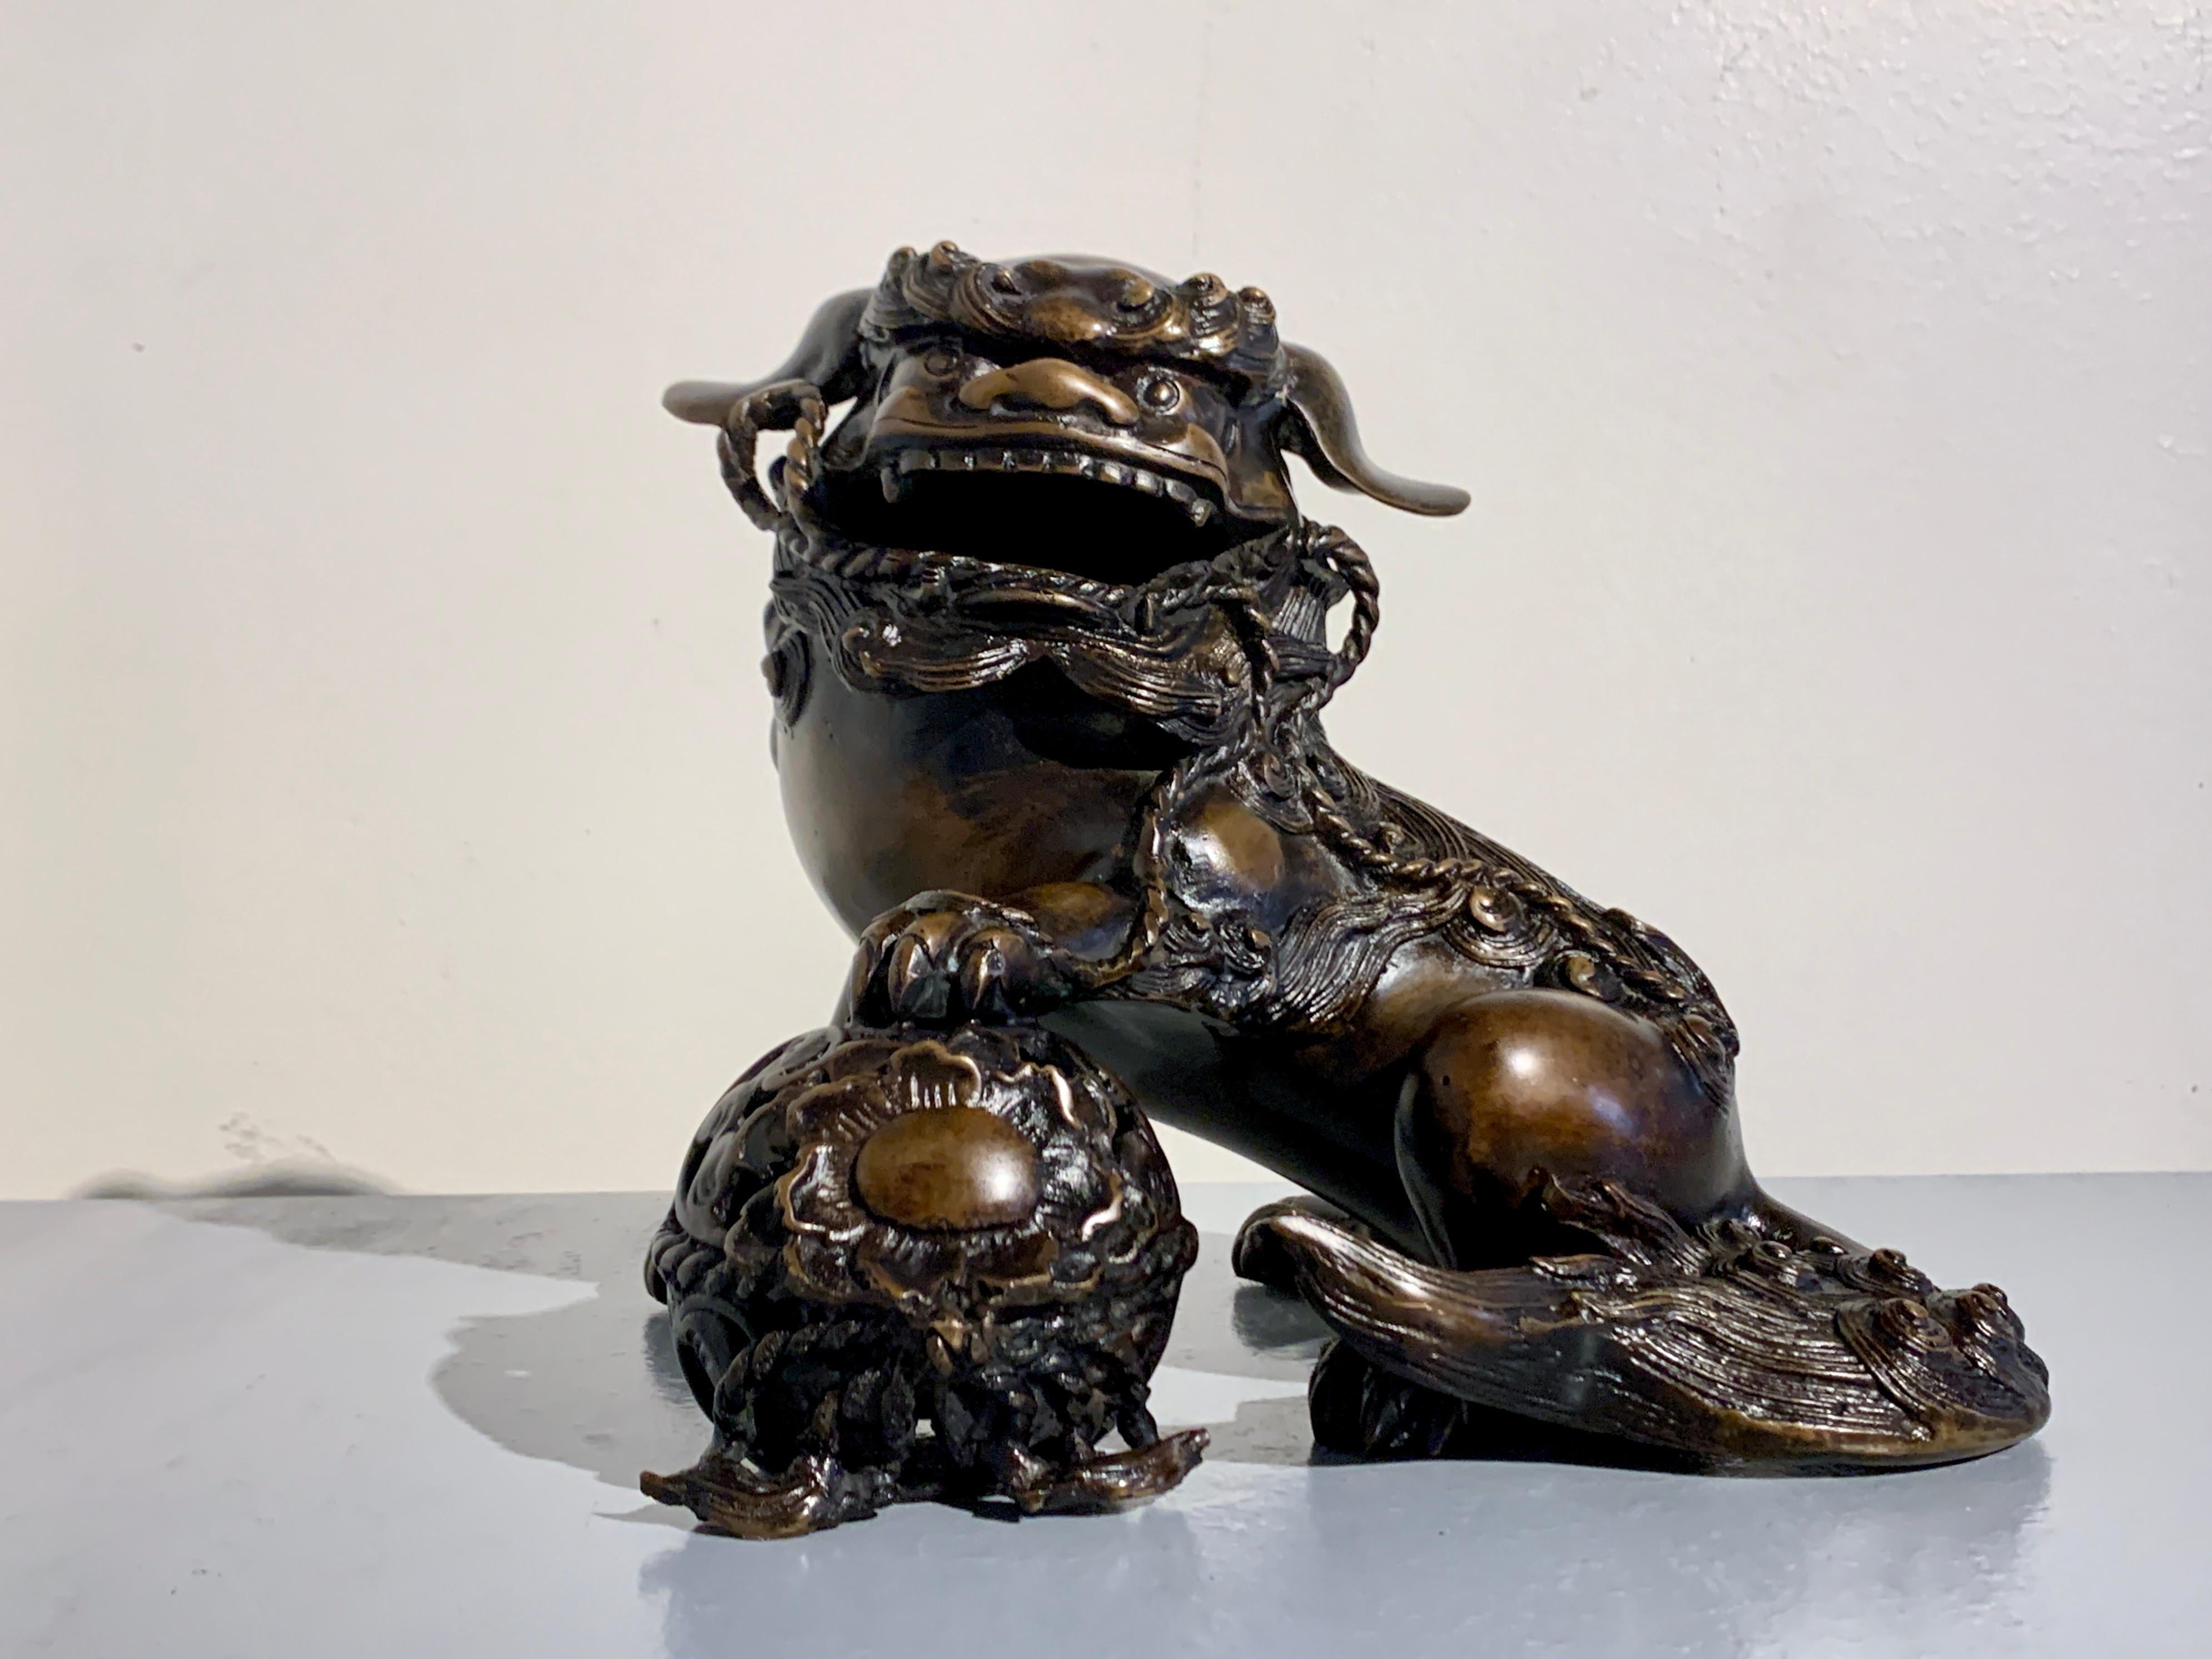 A heavy and powerfully cast Japanese bronze model of a shishi or foo lion by Hideyama / Shuzan, Meiji Period, circa 1900, Japan.

The dramatic lion, known as a shishi in Japan, is cast as both a powerful and playful being. He is portrayed seated